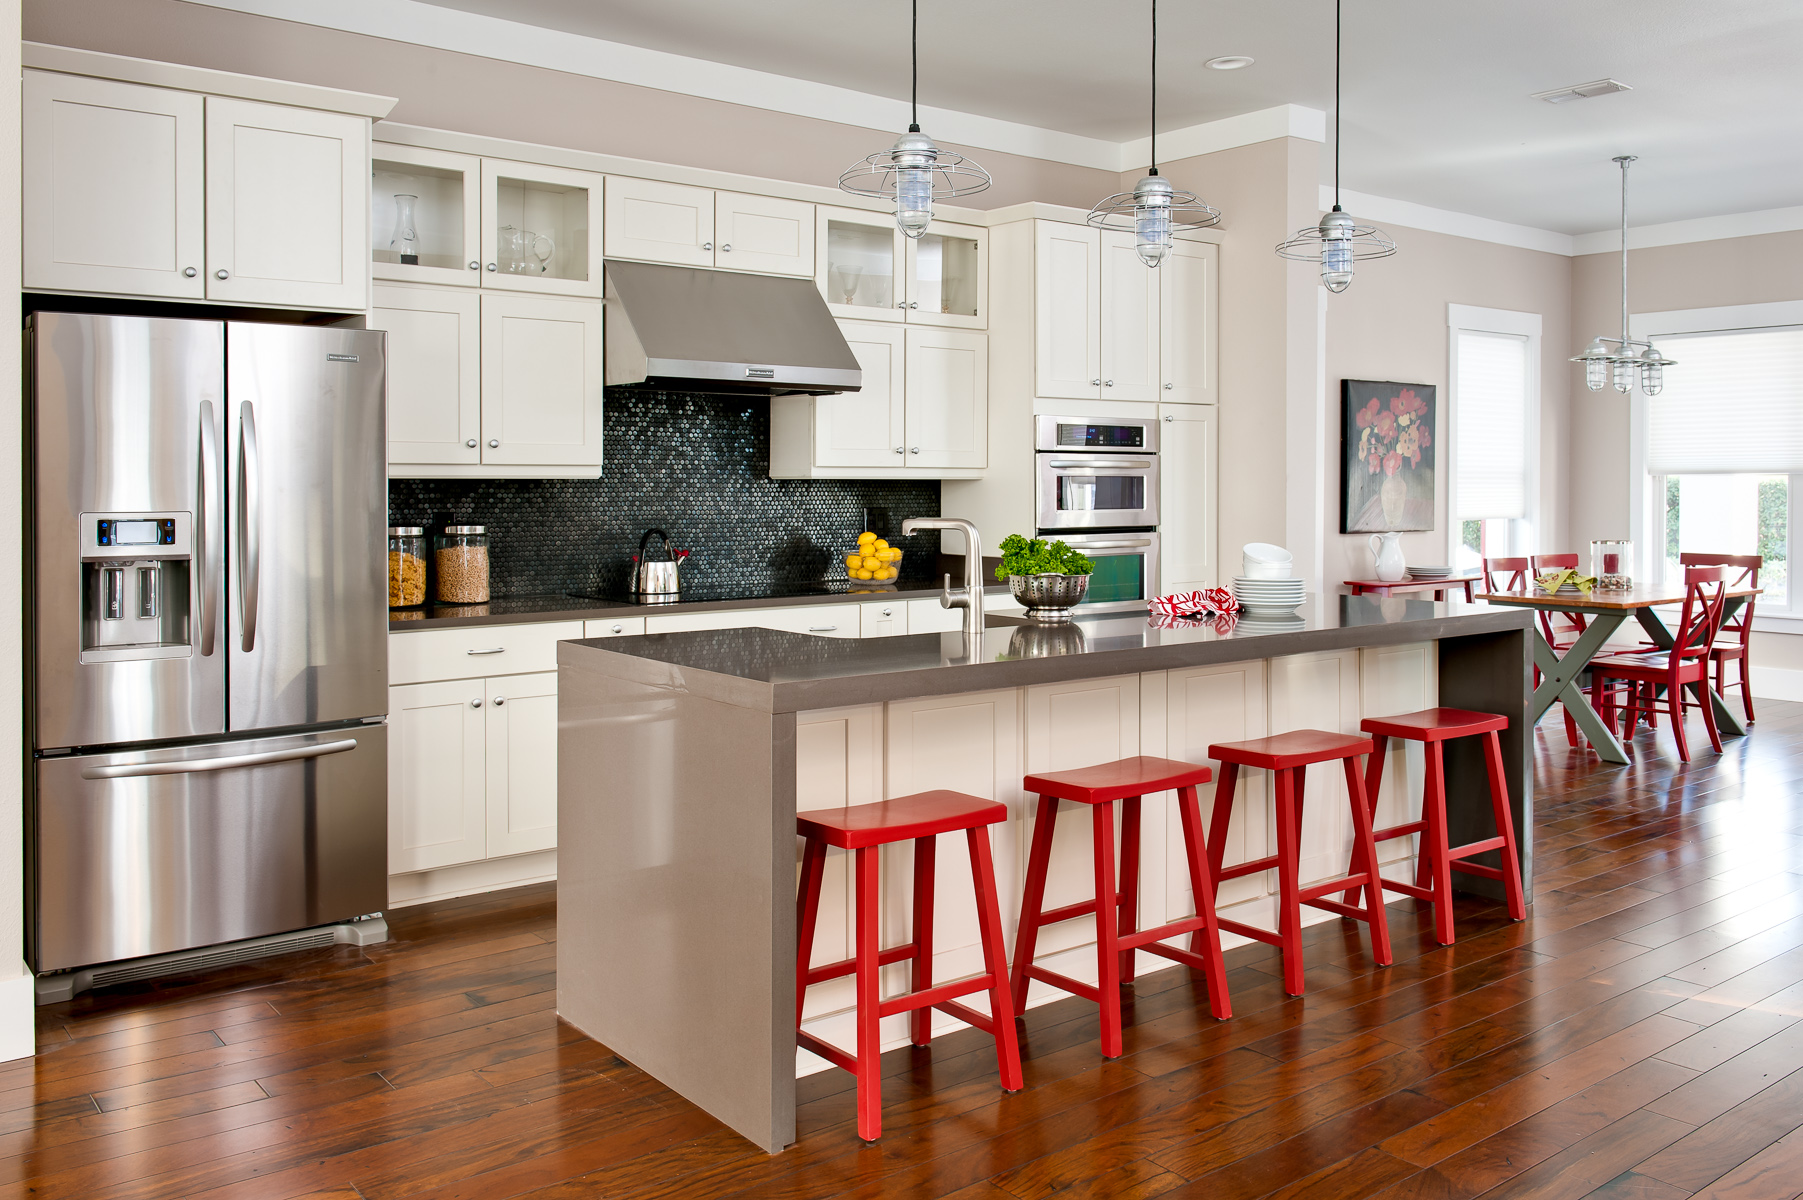 a kitchen with red stools.